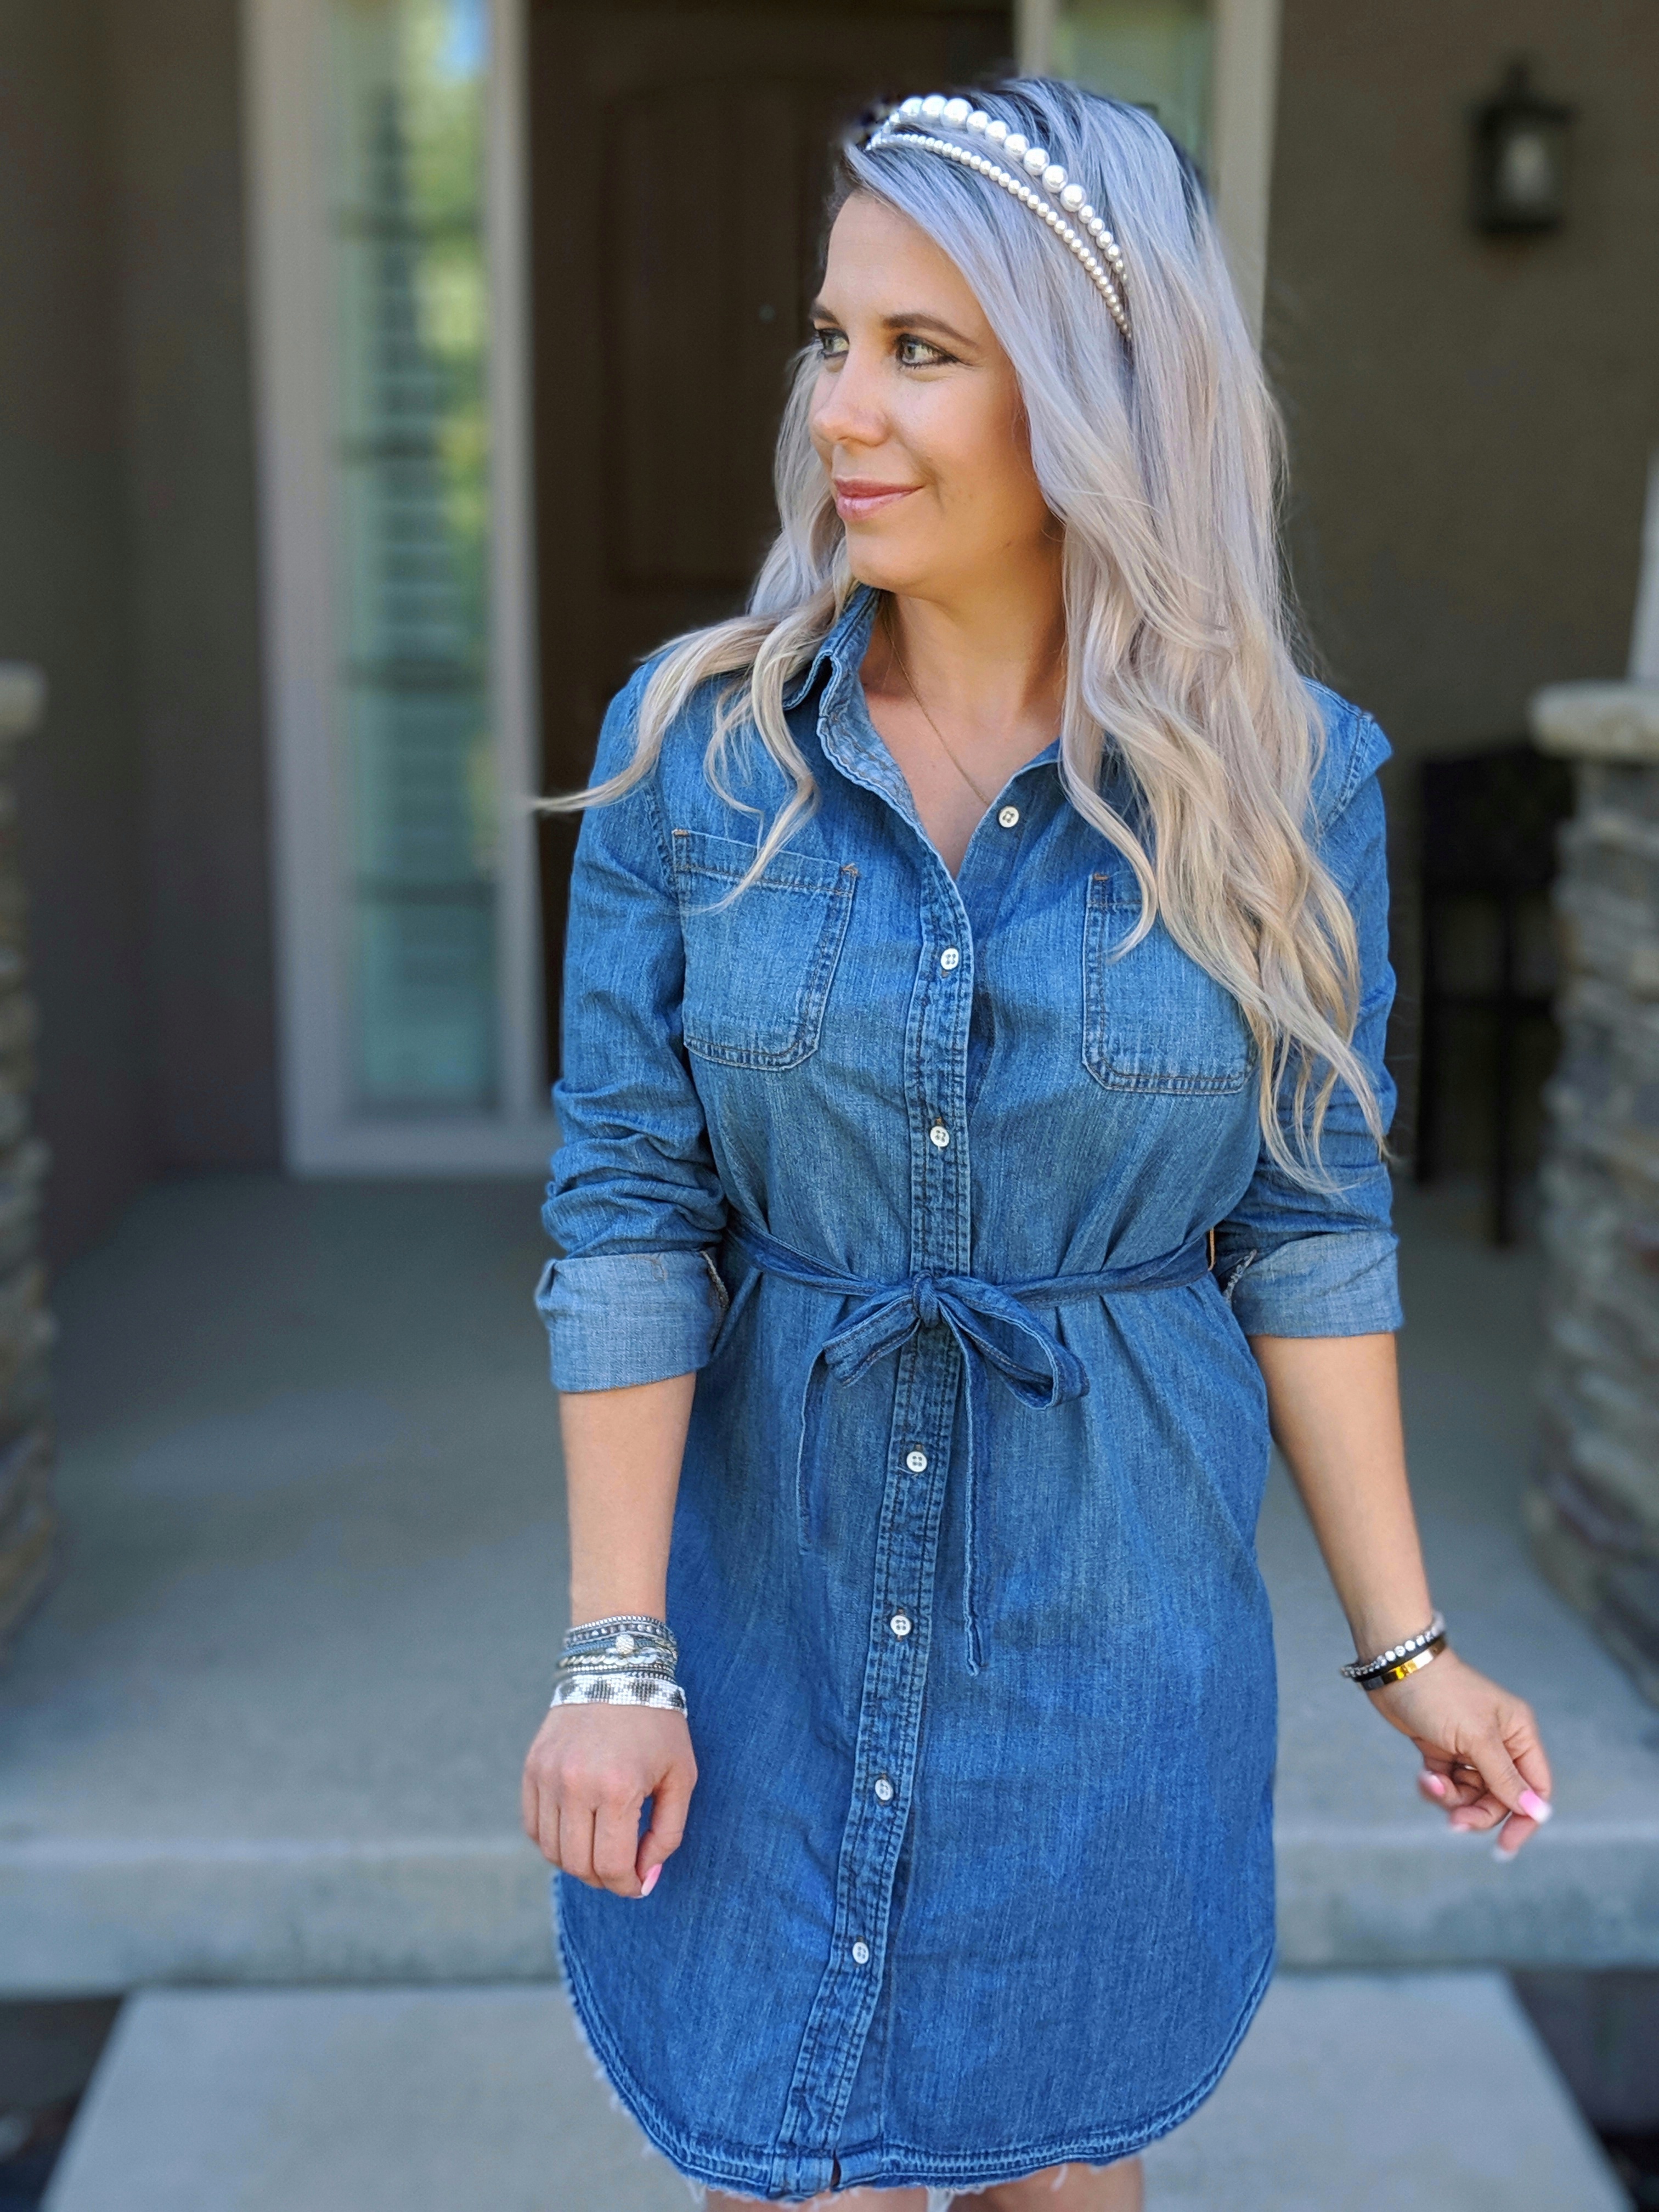 Slightly excitation Pathetic Chambray Dress Outfit Ideas - Jean Shirt Dress Outfits • COVET by tricia